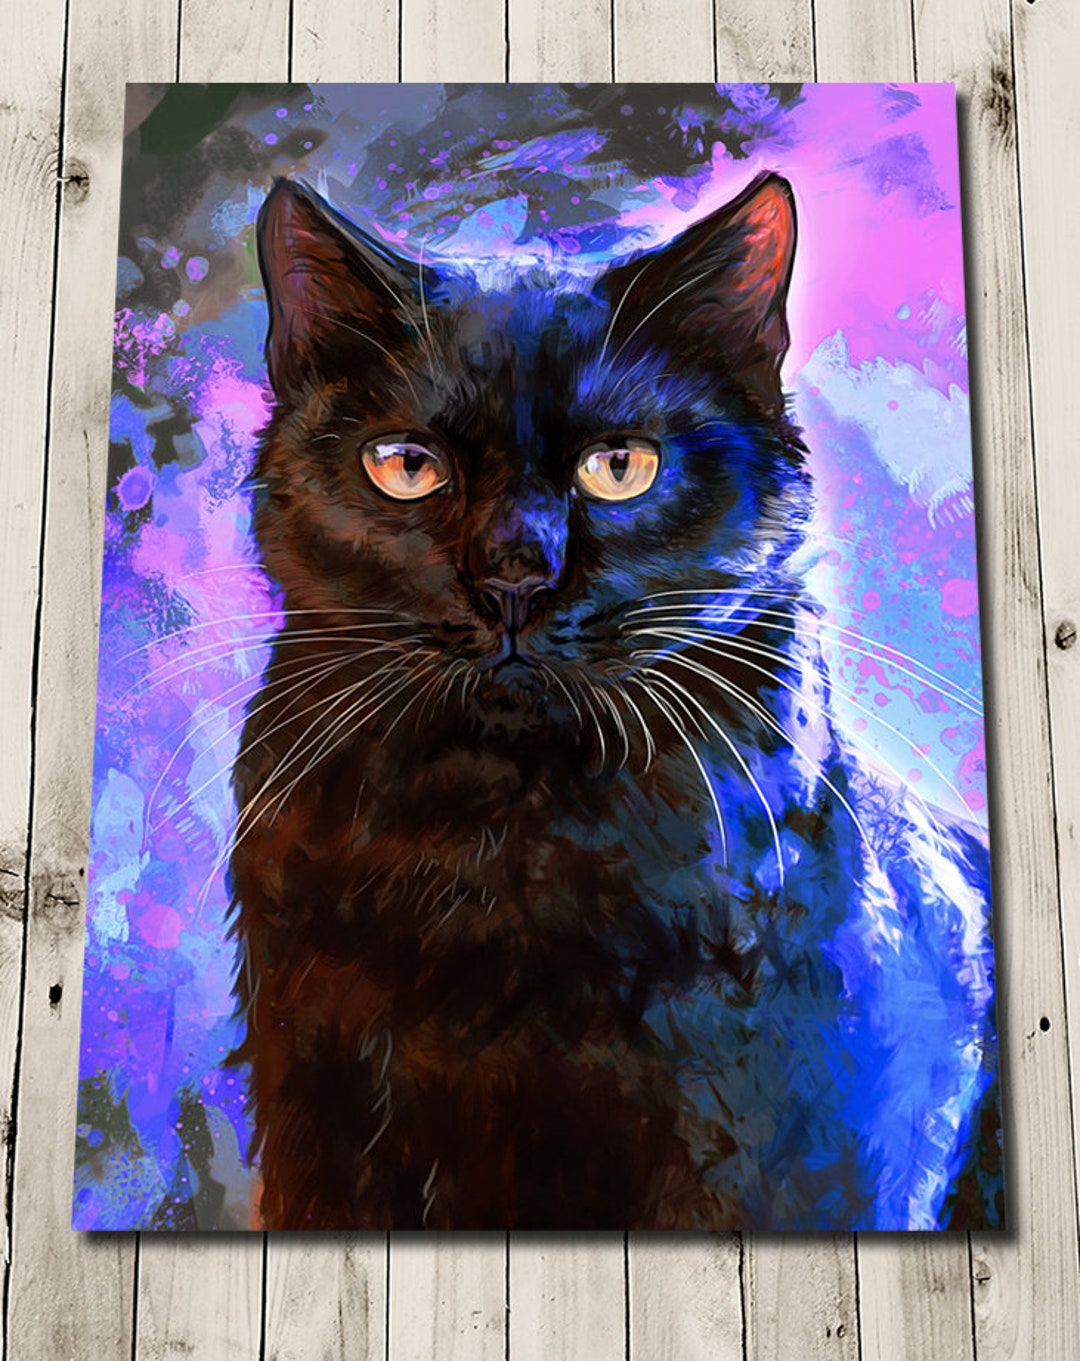 Original Acrylic Painting, 11x14 Stretched Canvas, Black Cat on a